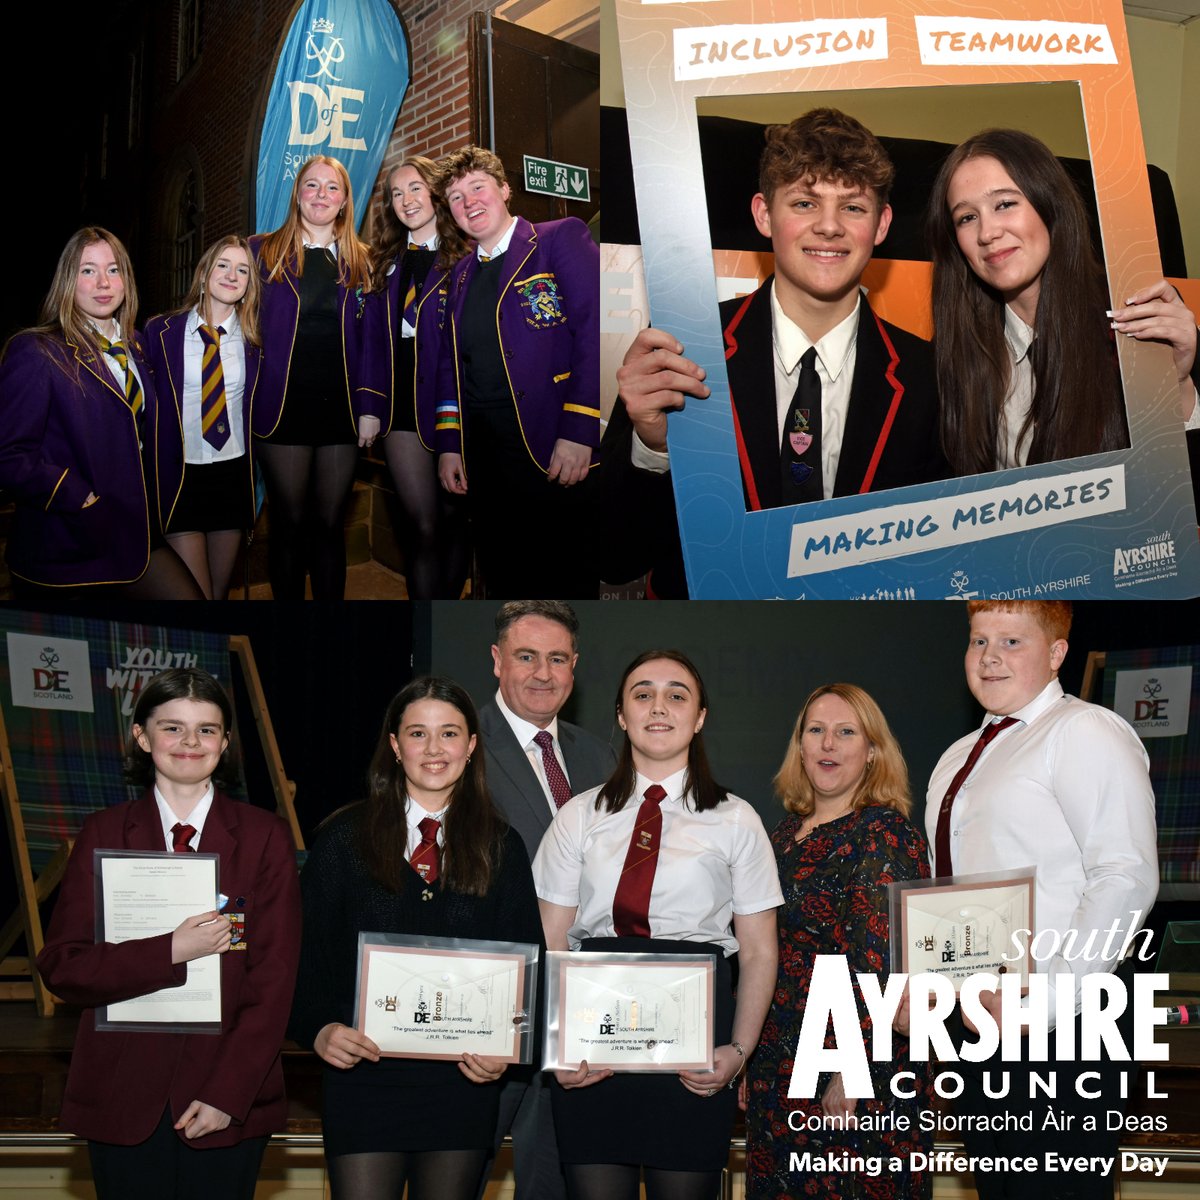 Over 360 young people from South Ayrshire received their Duke of Edinburgh Awards at a prizegiving ceremony at Troon Town Hall. Read more - ow.ly/ucF850QWRrA